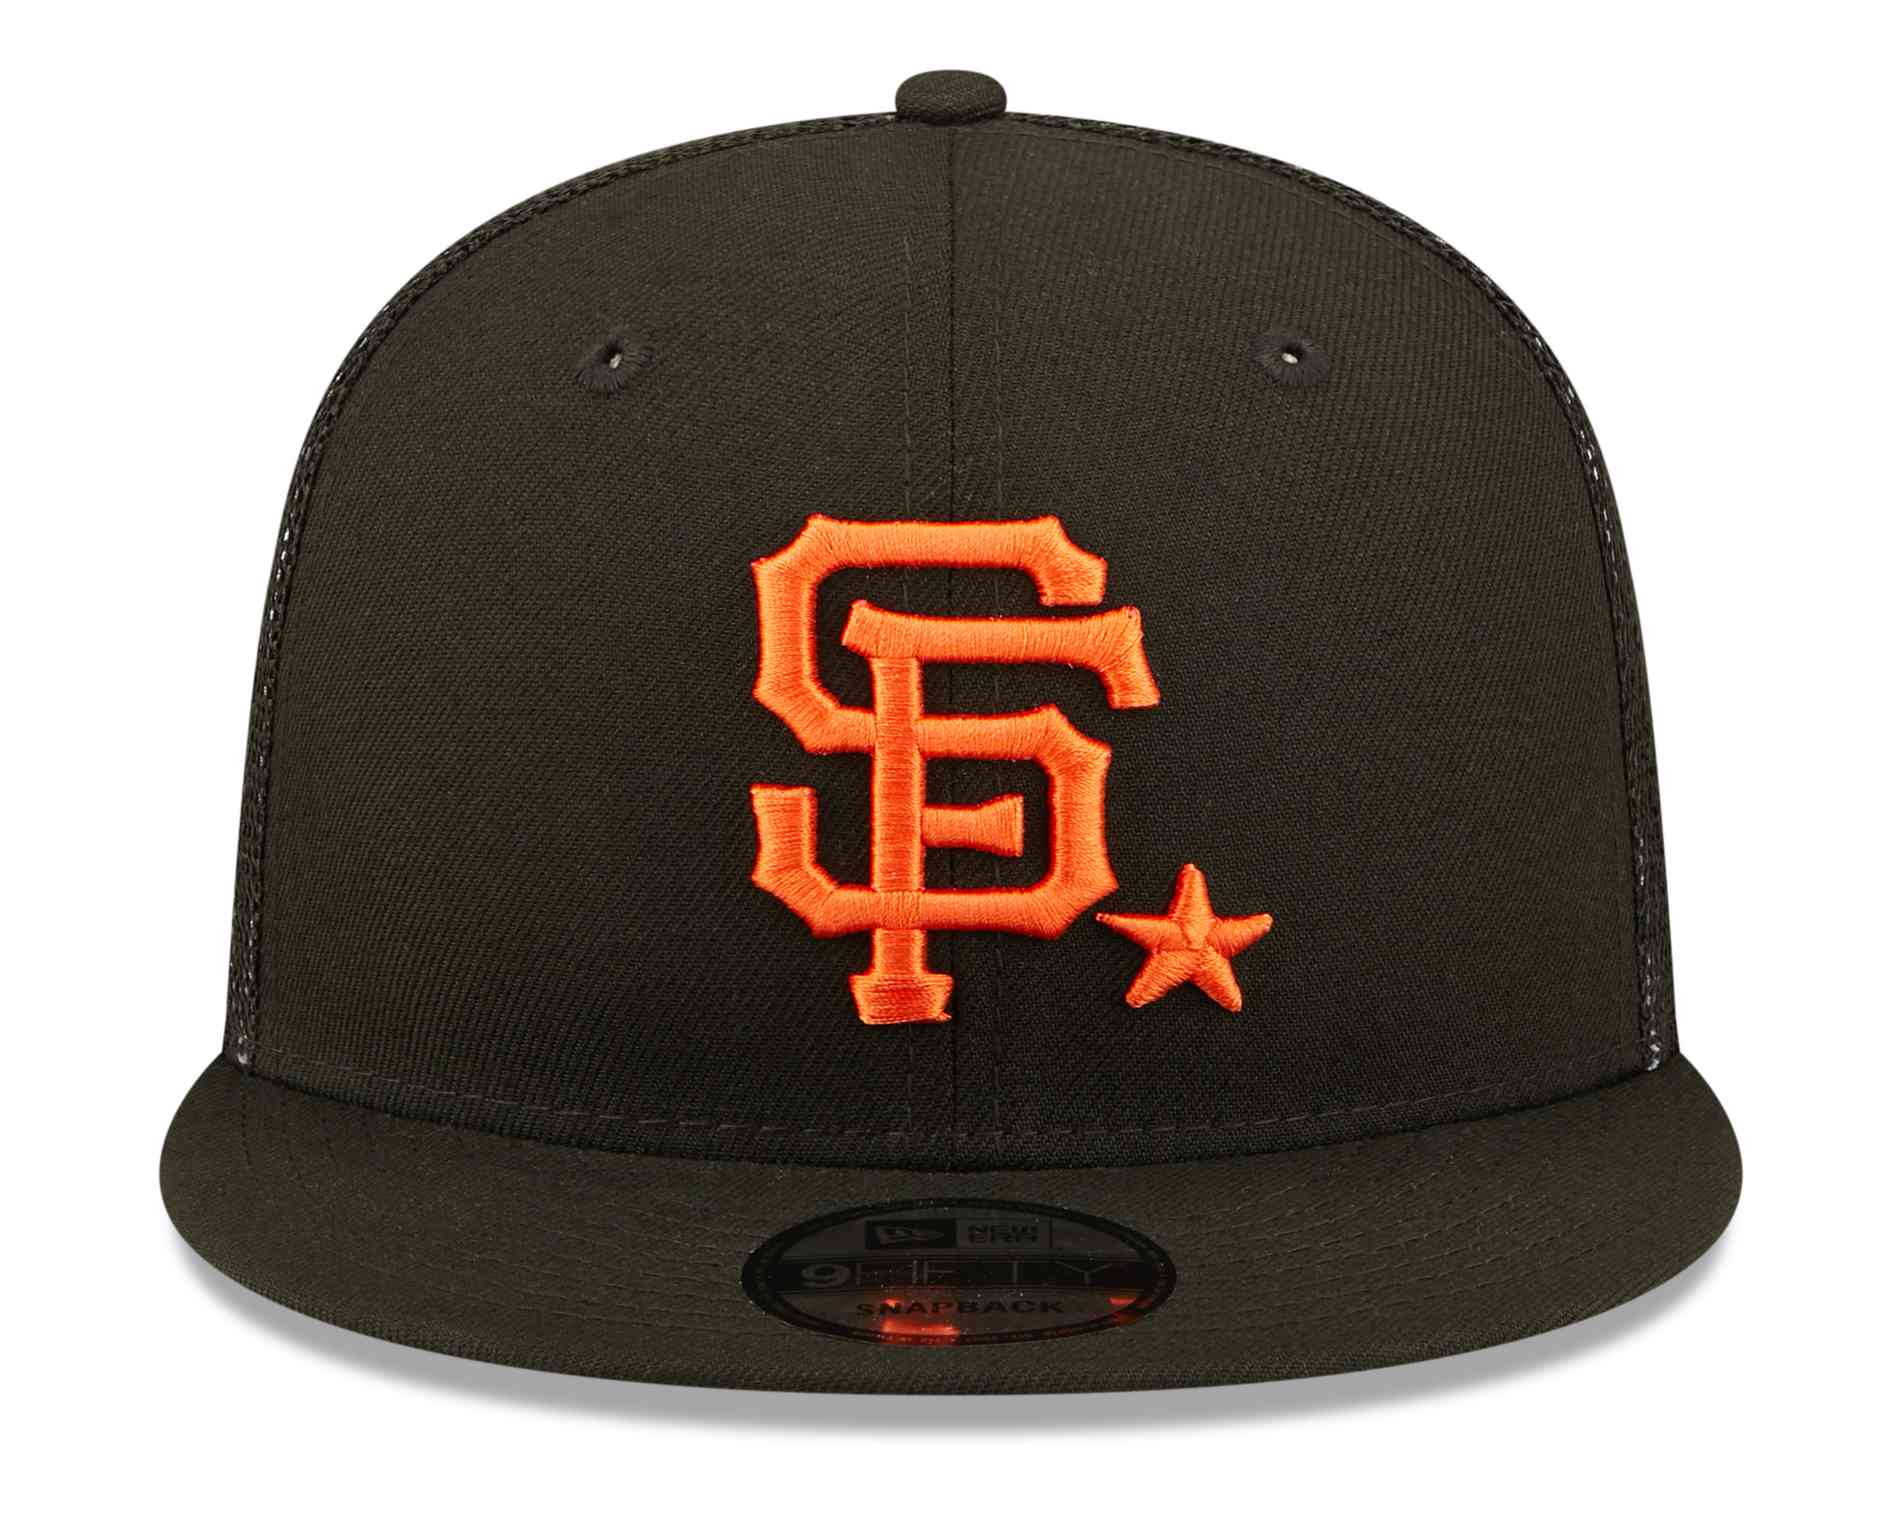 New Era - MLB San Francisco Giants All Star Game Patch 9Fifty